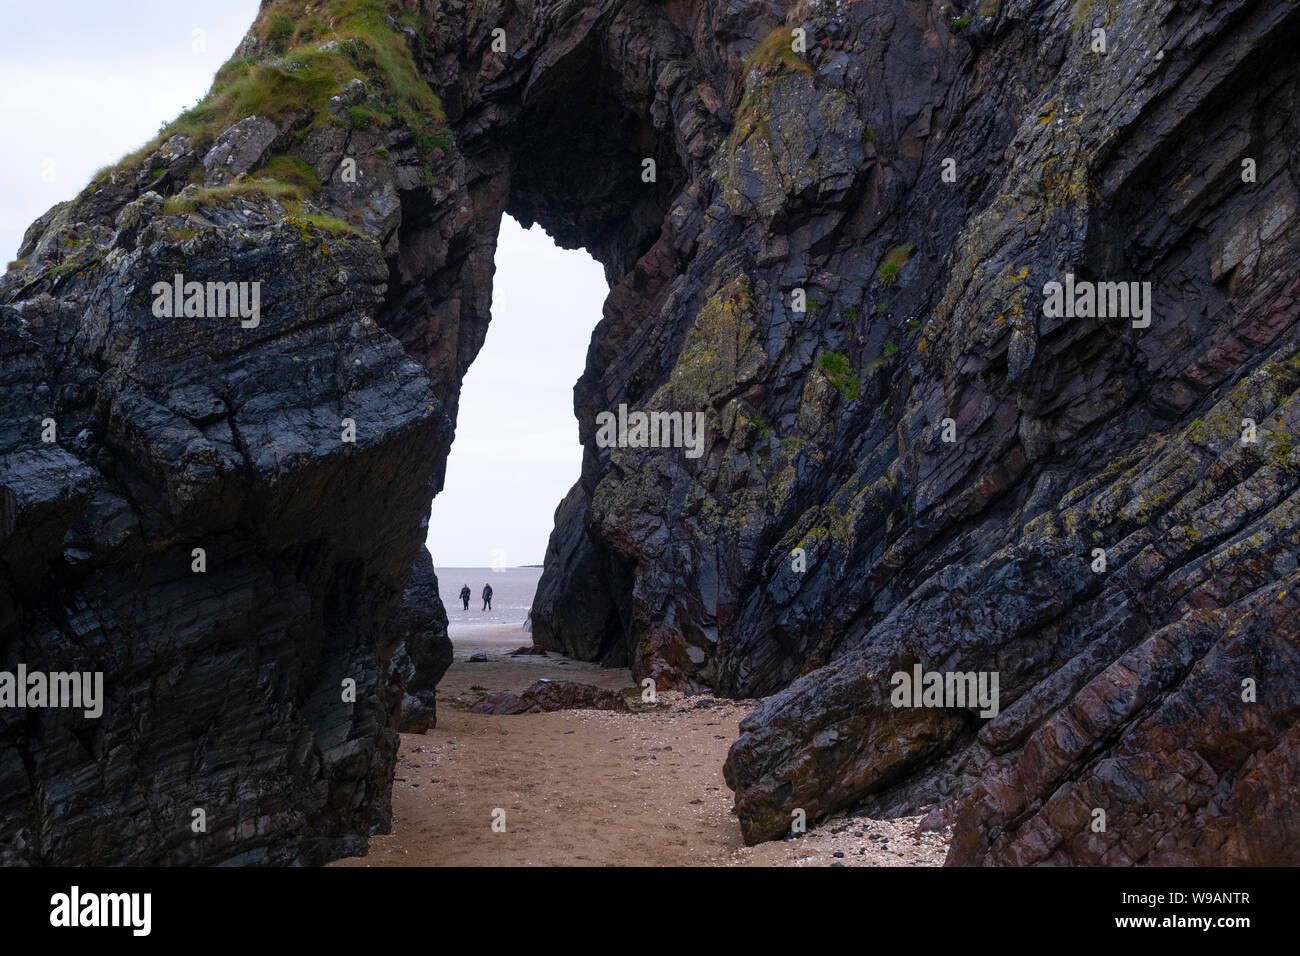 The famous Needles Eye rock arch near Sandyhills, Dumfries and Gallway on the Solway Firth, Scotland. Stock Photo